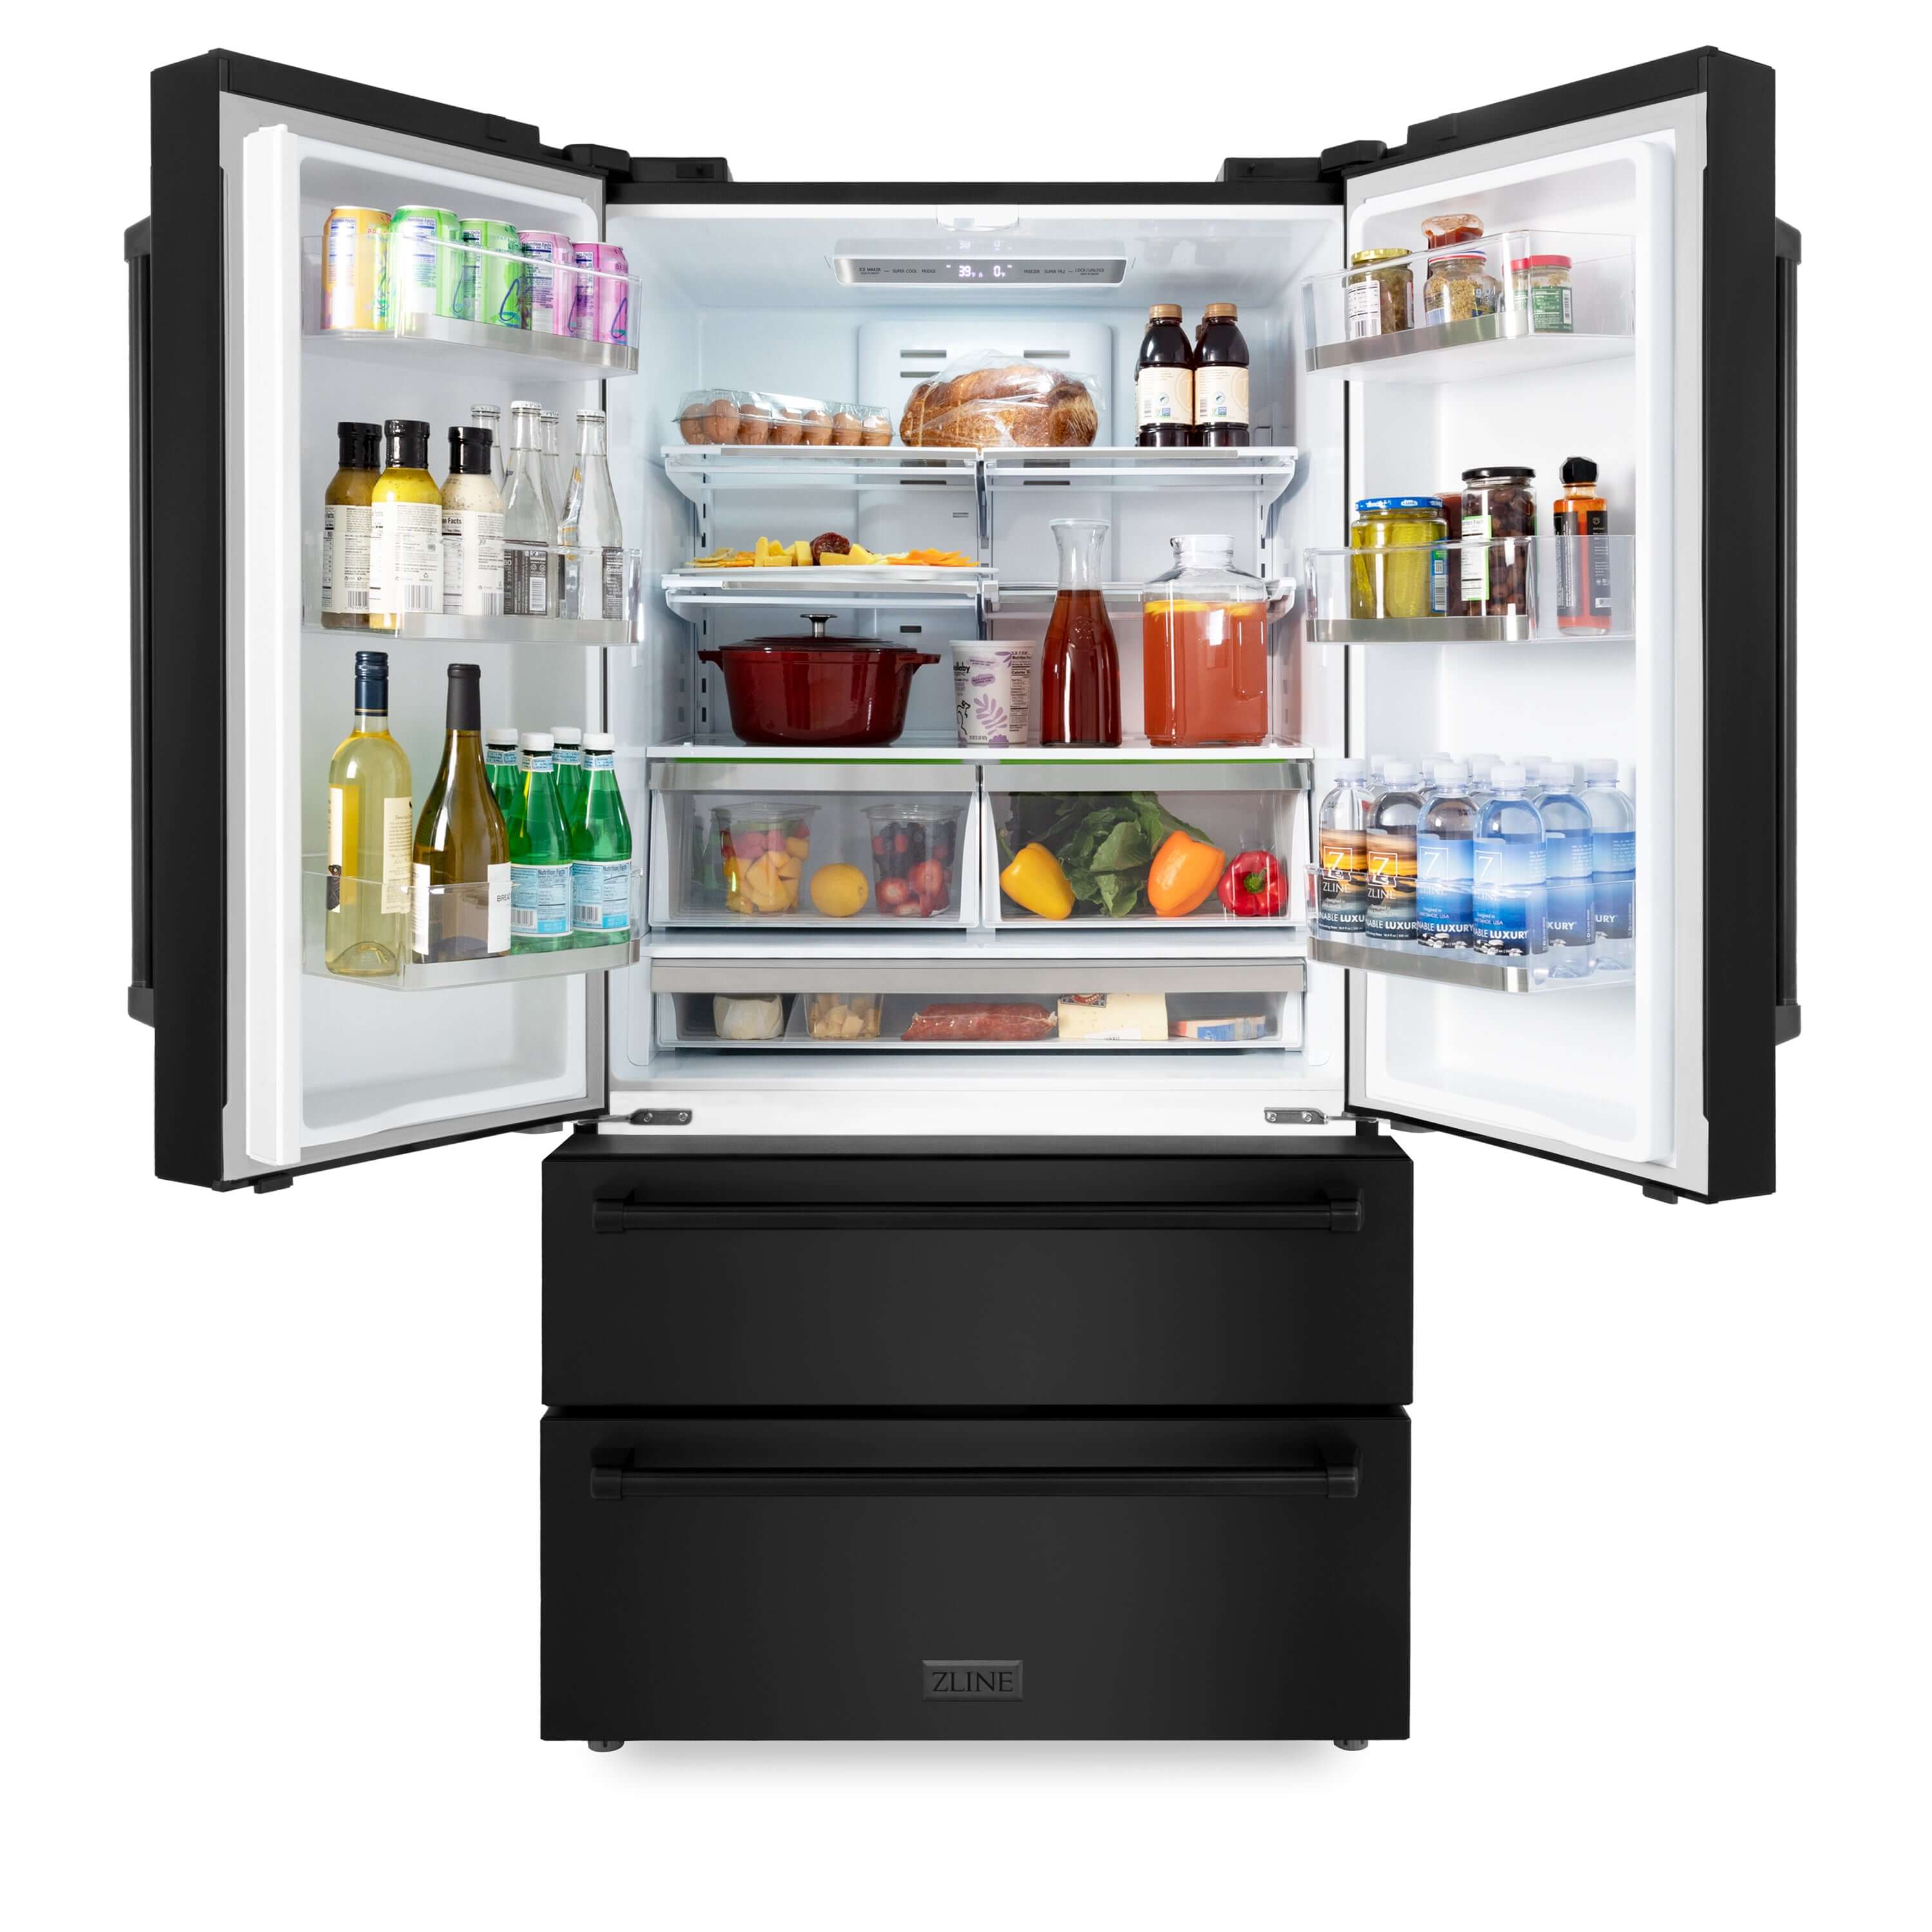 ZLINE 36 in. Freestanding French Door Refrigerator with Ice Maker in Black Stainless Steel (RFM-36-BS) front, open with food on adjustable shelving inside refrigeration compartment.